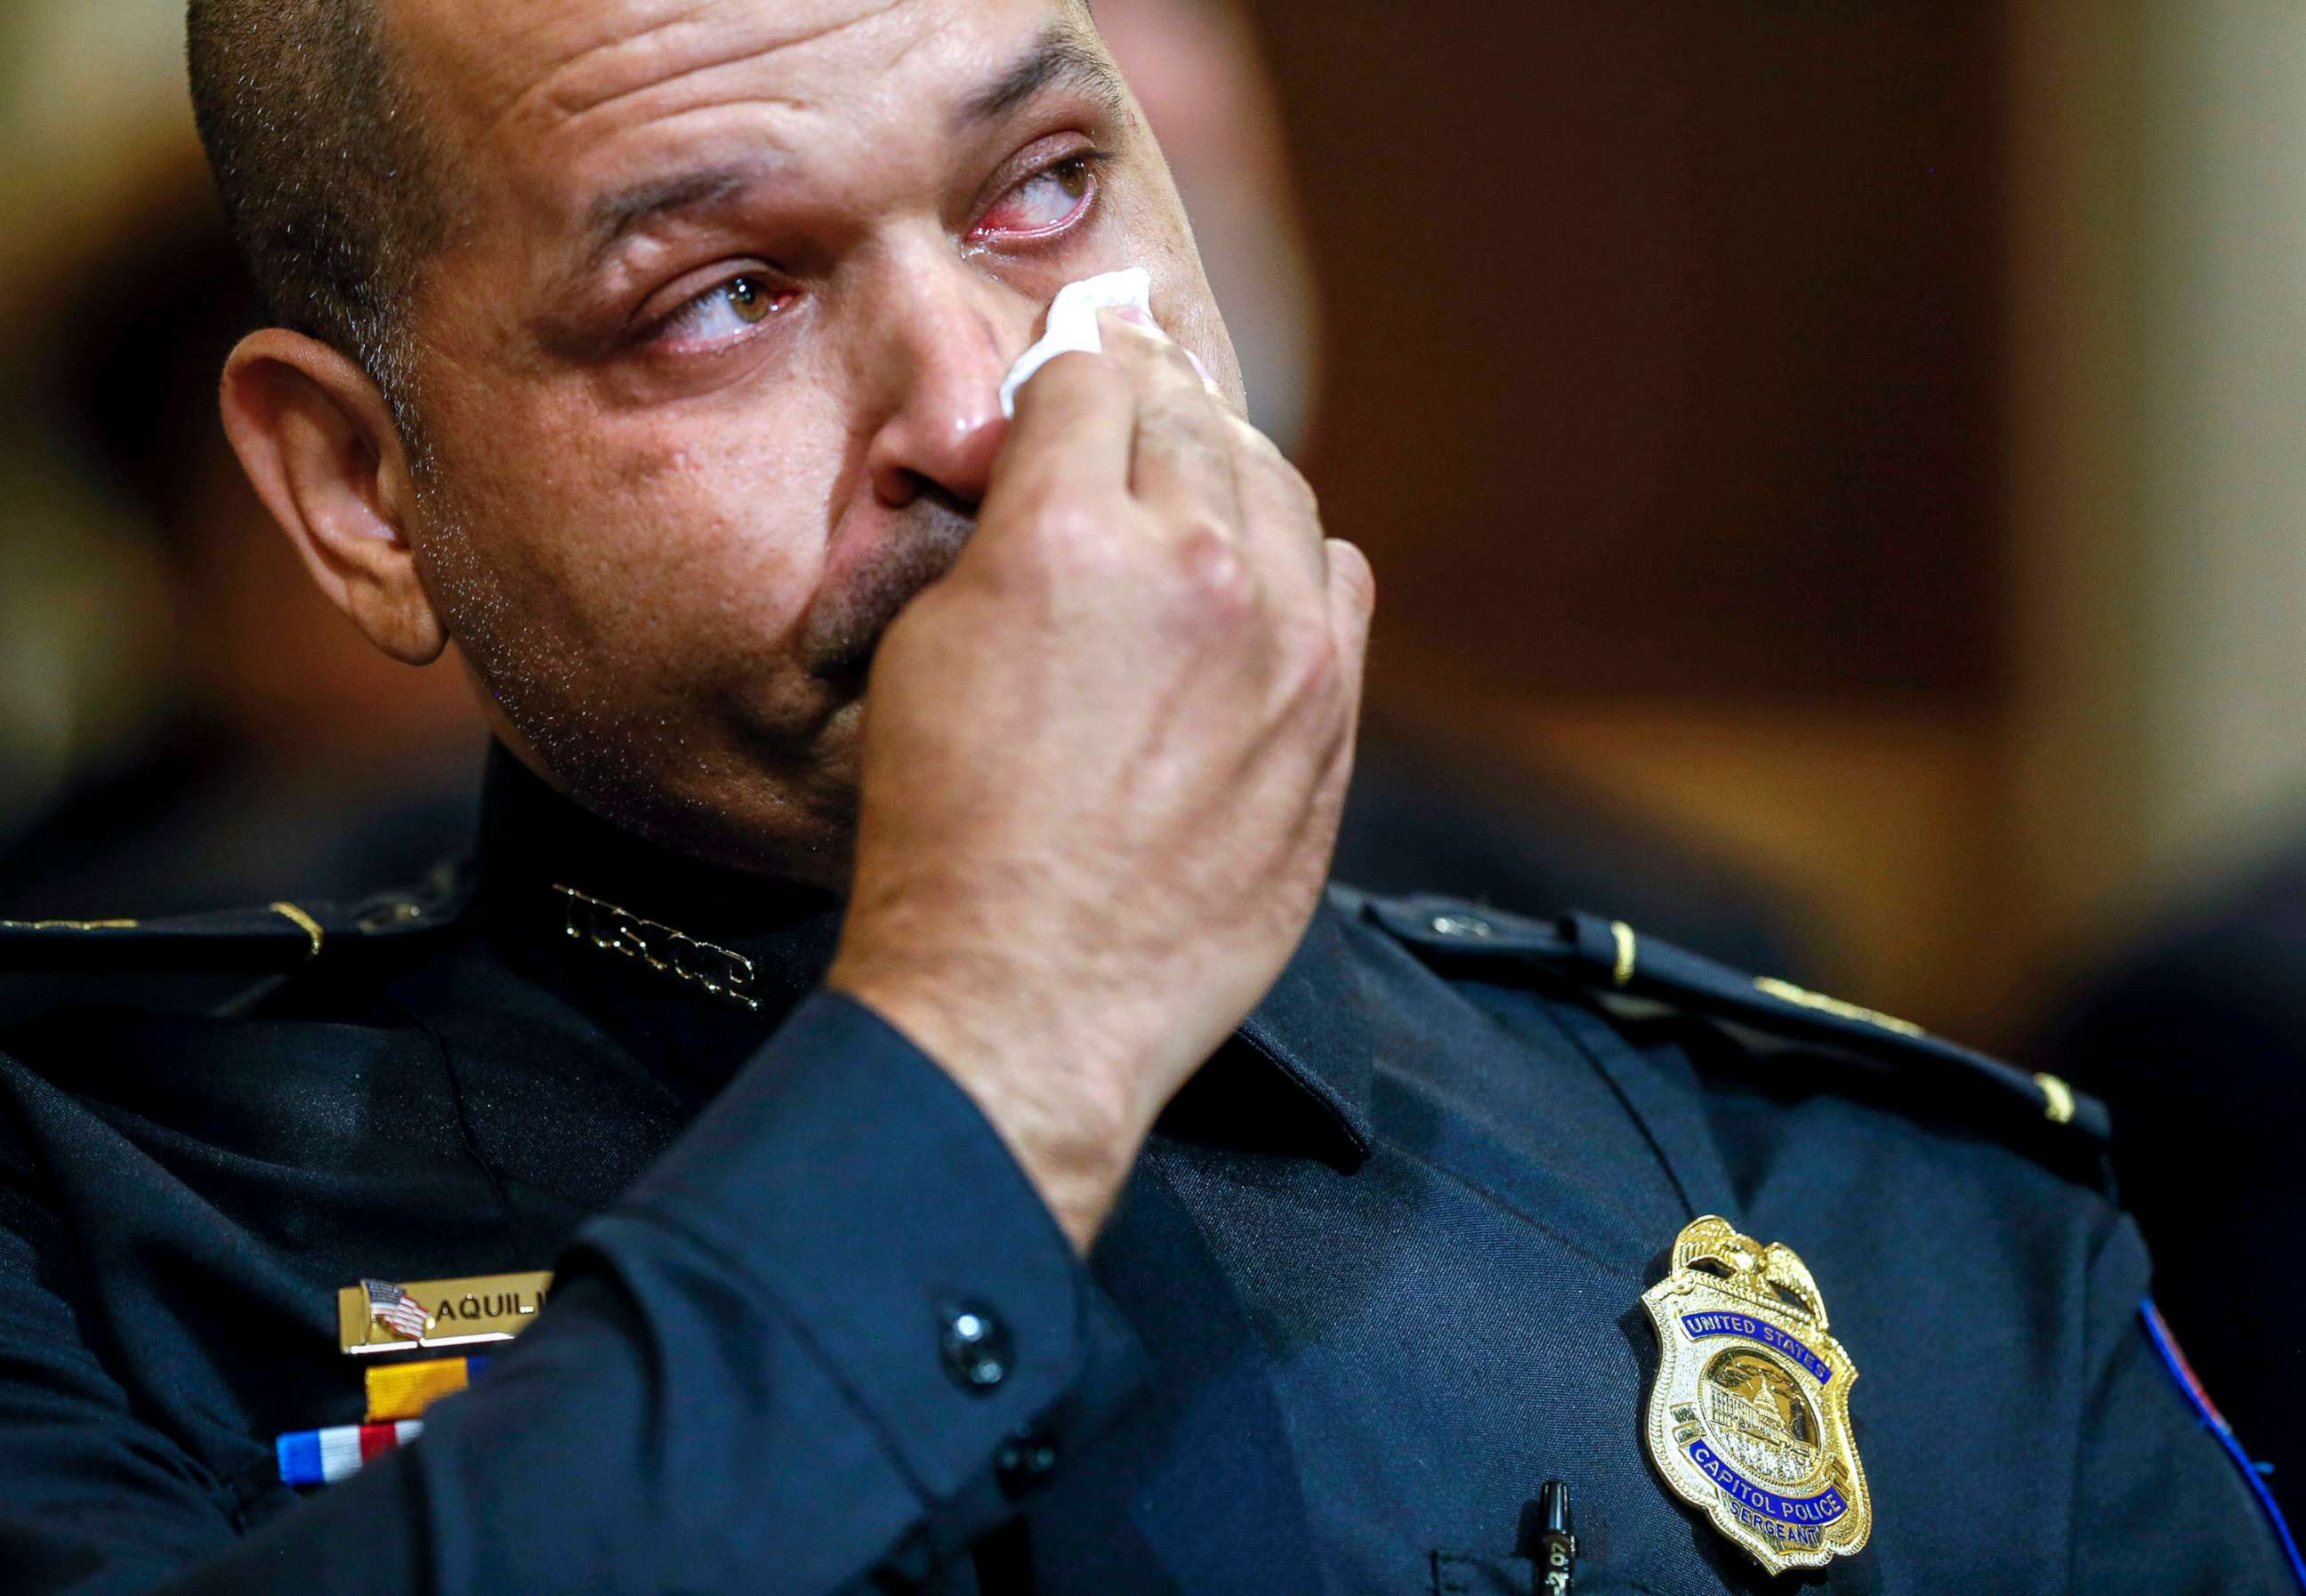 PHOTO: U.S. Capitol Police Sgt. Aquilino Gonell wipes his eye as he watches a video being displayed during a House select committee hearing on the Jan. 6 attack on Capitol Hill in Washington, D.C., July 27, 2021.